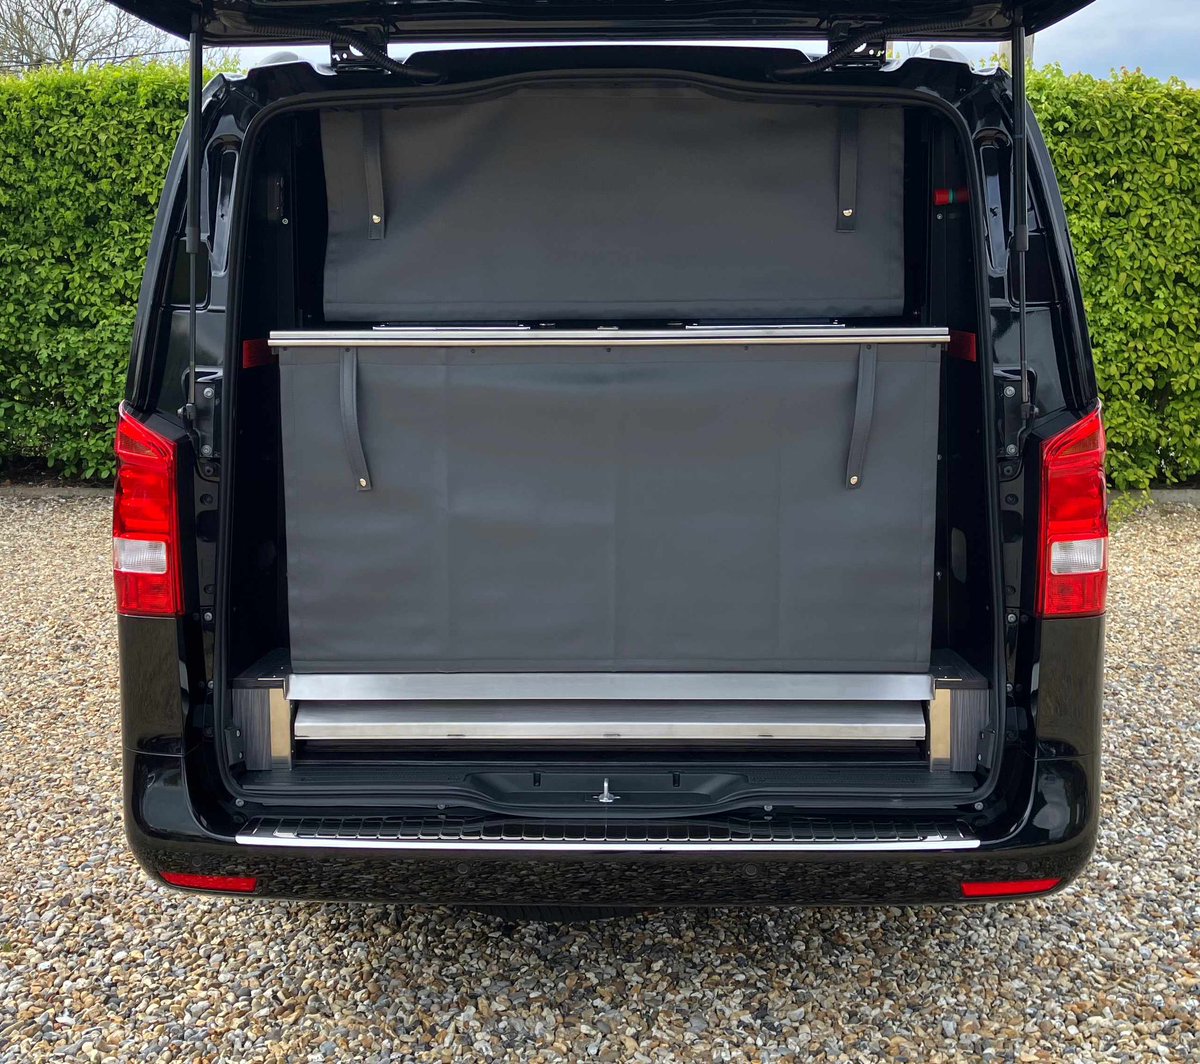 It’s #vitofriday! This shiny new extra-long Vito has been fitted out with our signature ‘Rise&Fall’ decking and additional bespoke bulkhead storage ready and waiting for delivery next week! #superioruk #mercedesbenz #FuneralVehicles